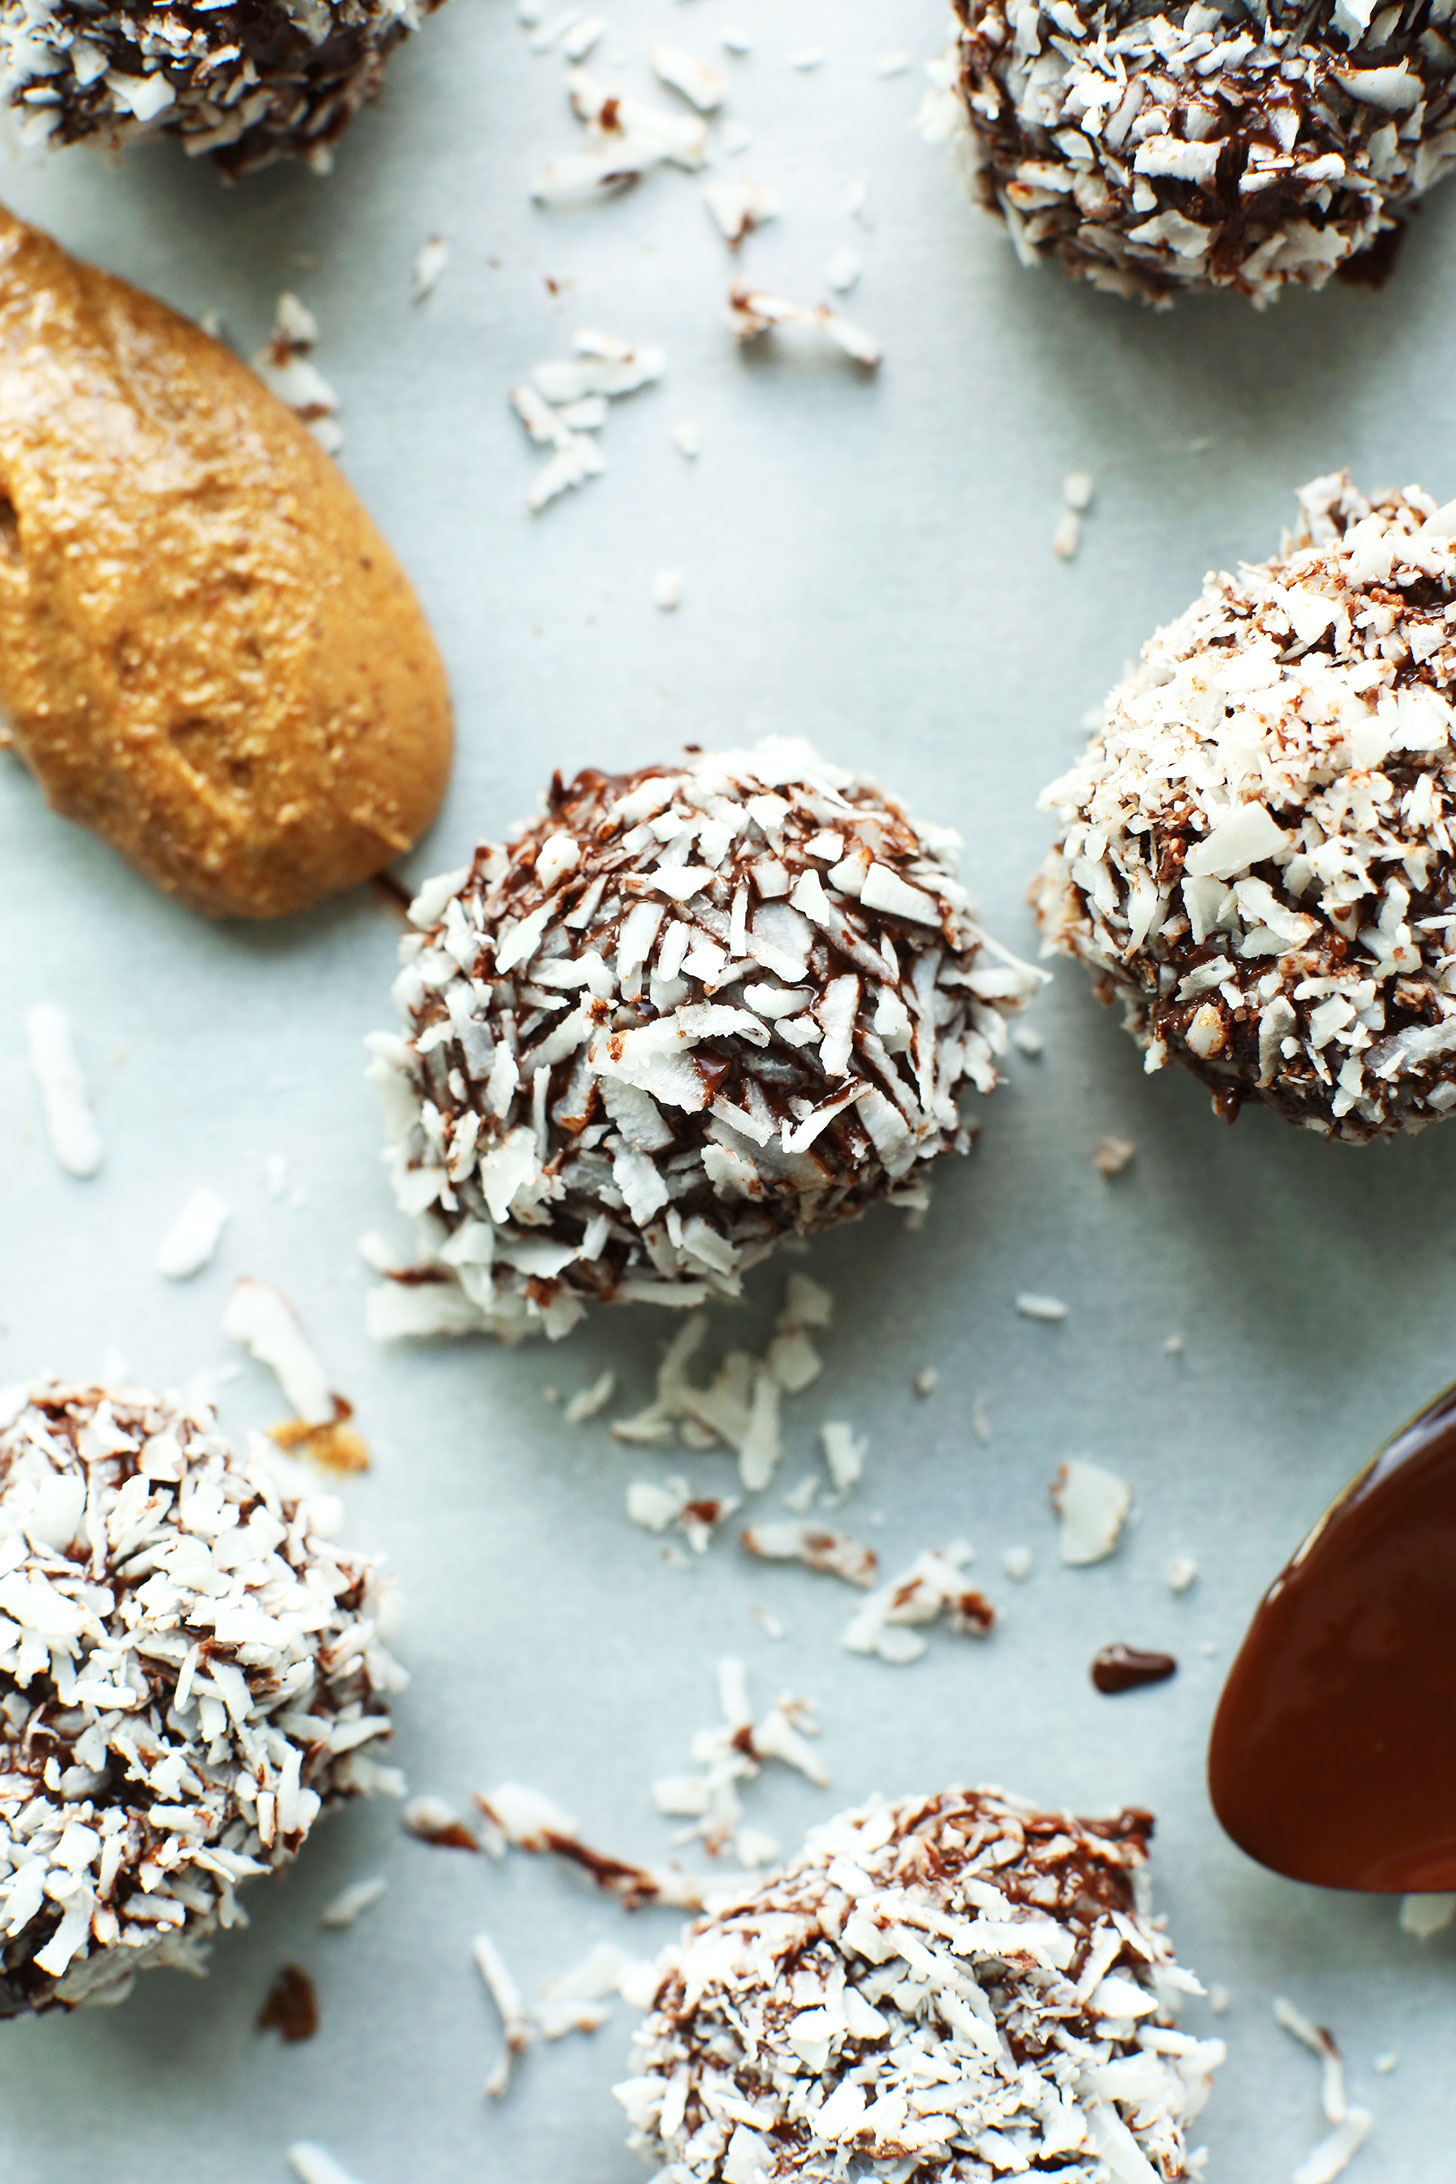 Spoonfuls of almond butter and melted dark chocolate beside Dark Chocolate Almond Butter Snowballs